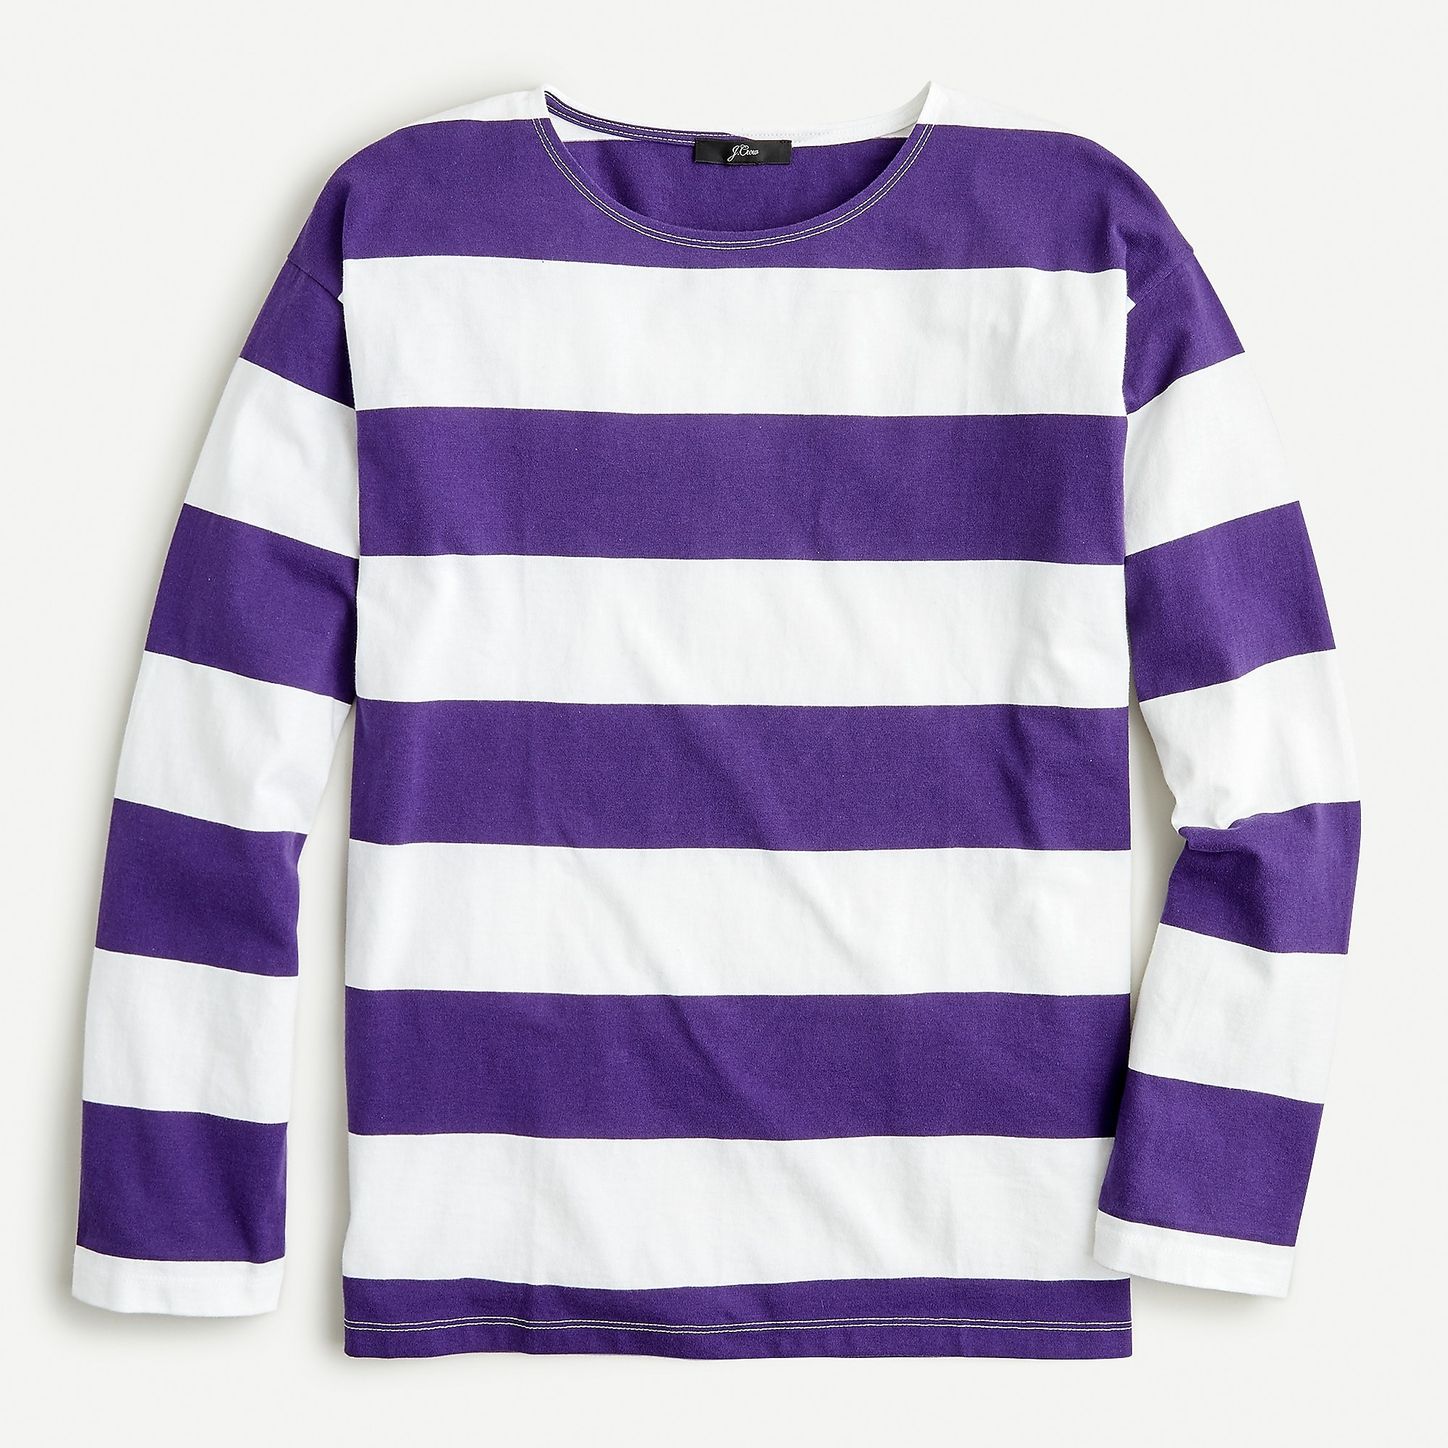 Alion Mens Pullover Casual Contrast Color Stripes Long Sleeve Cotton Tops Blouse